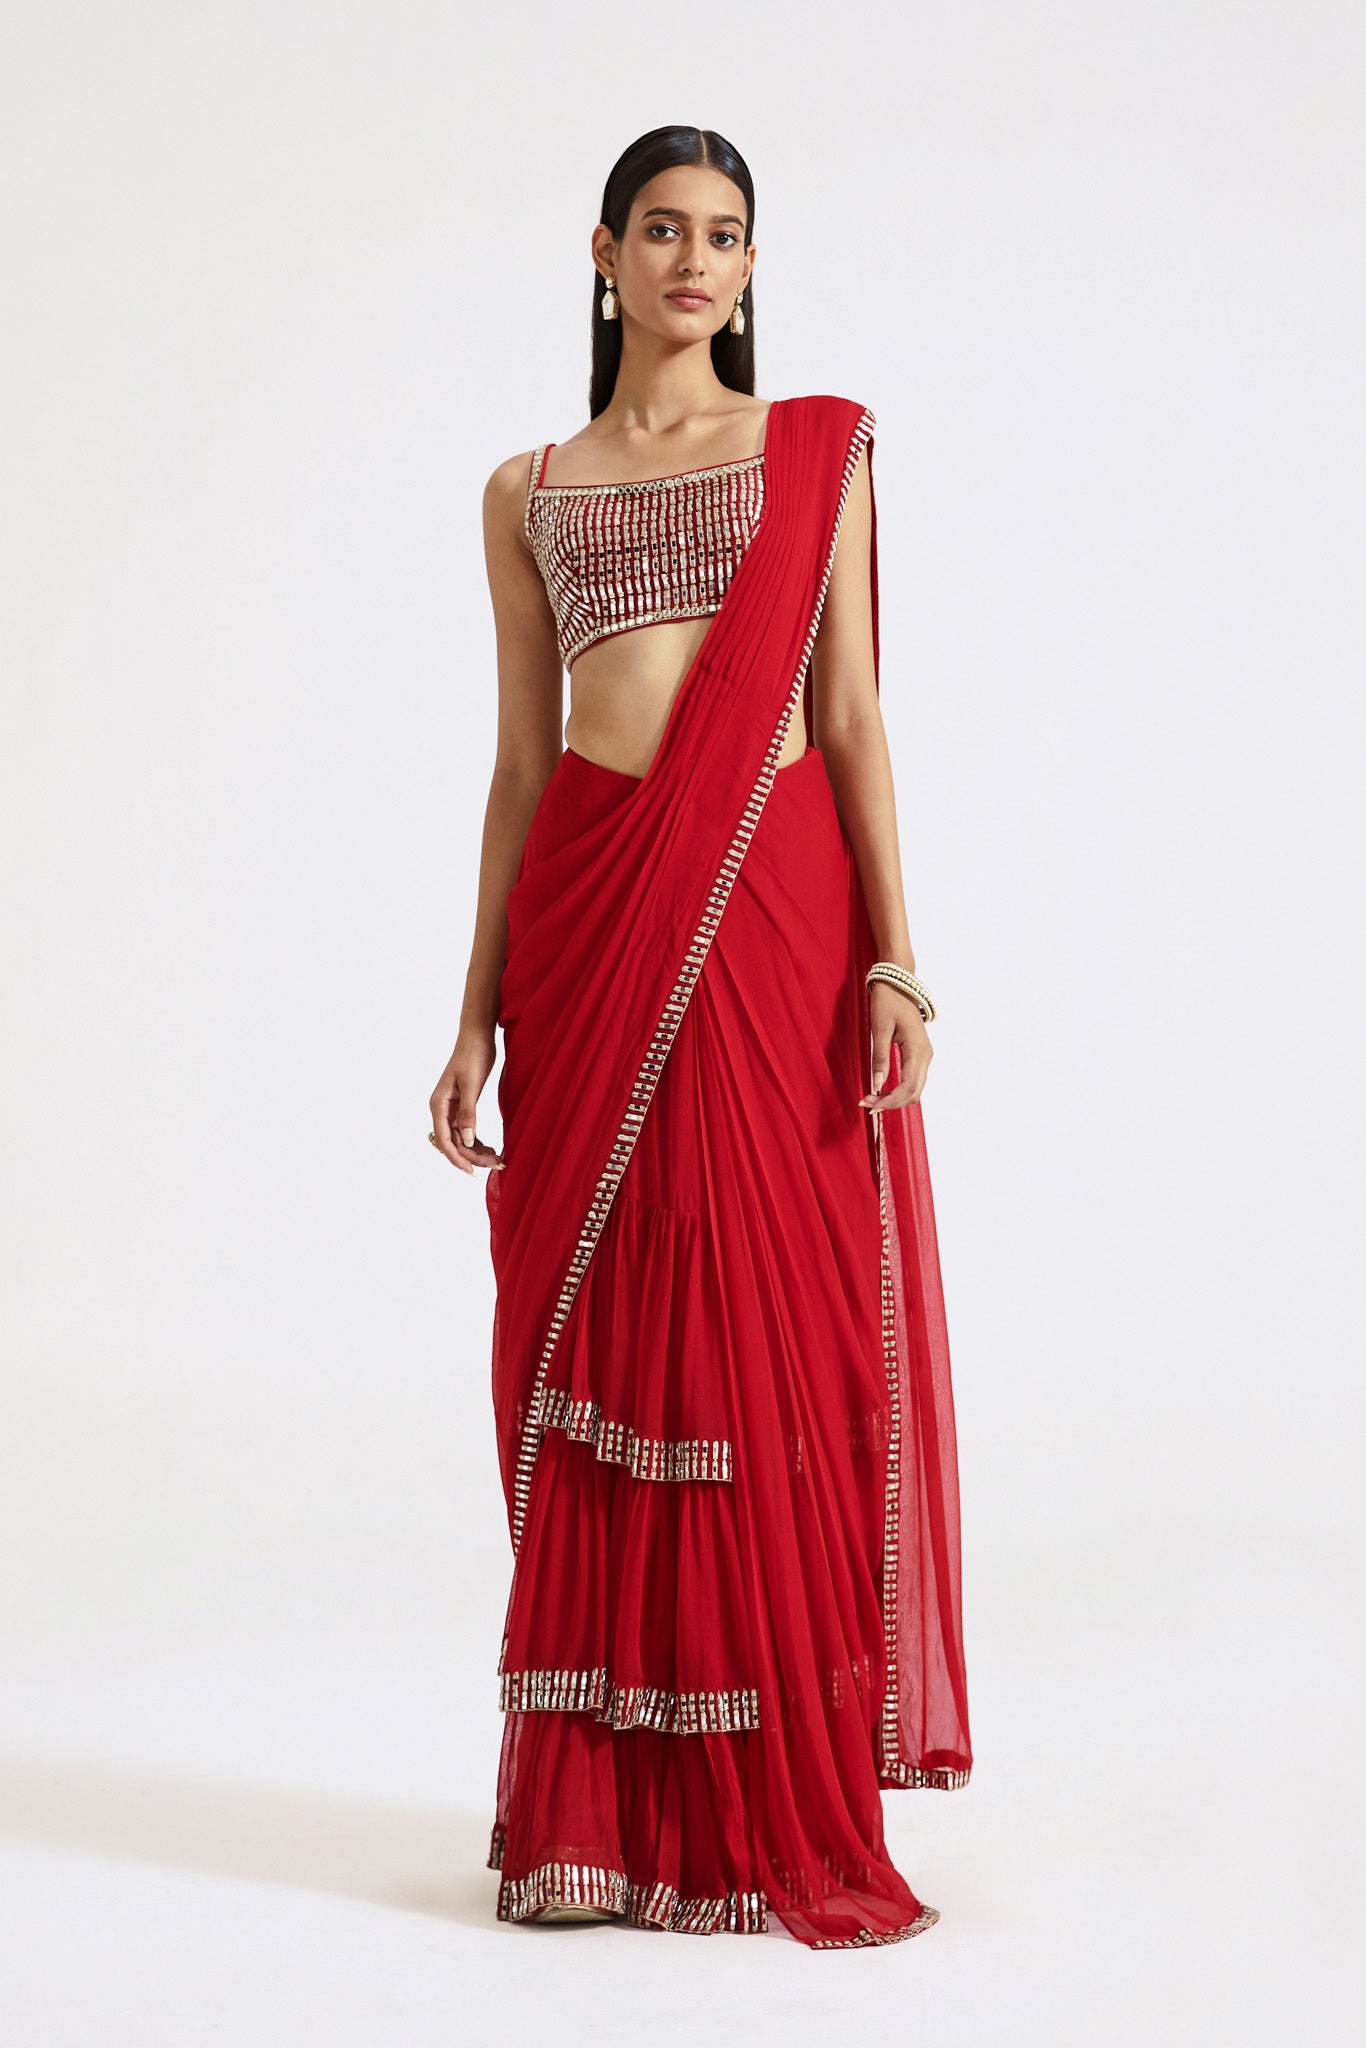 Buy red mirror work georgette pre-draped saree online in USA with embroidered blouse. Look your best at parties and weddings in beautiful designer sarees, embroidered sarees, handwoven sarees, silk sarees, organza saris from Pure Elegance Indian saree store in USA.-full view